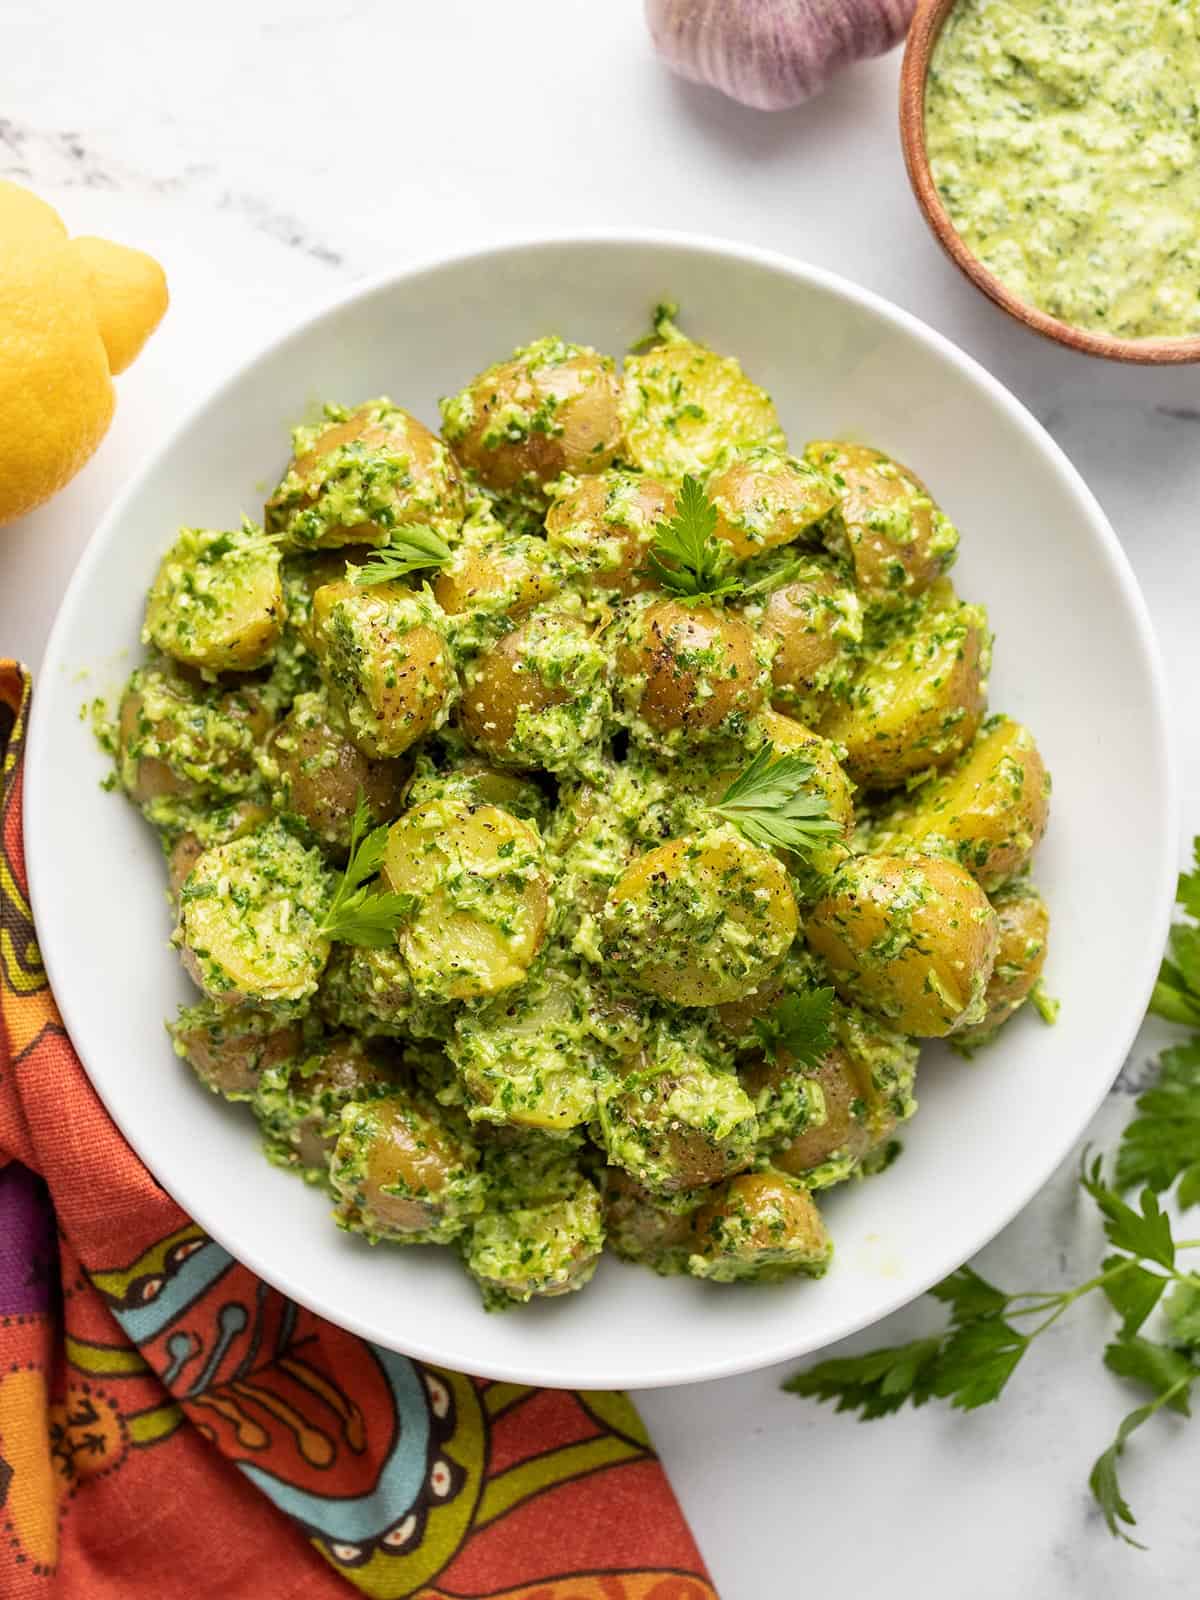 Overhead view of parsley pesto potato salad in a bowl.